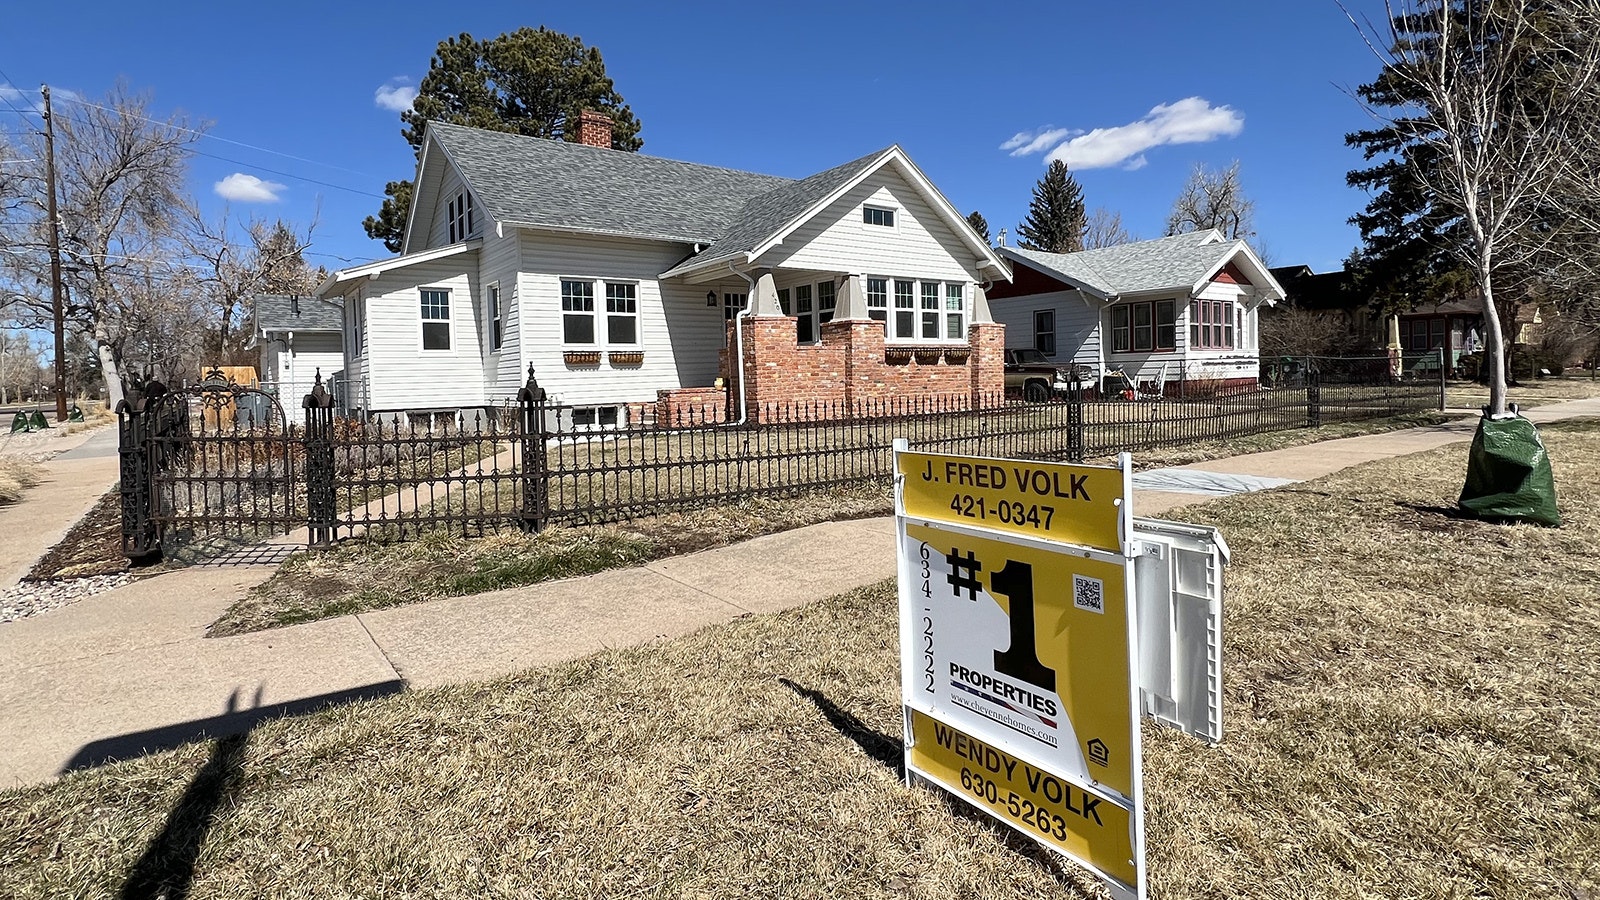 Wyoming Realtors say a landmark settlement could mean homebuyers will pay less in fees, but could have unintended consequences as well.